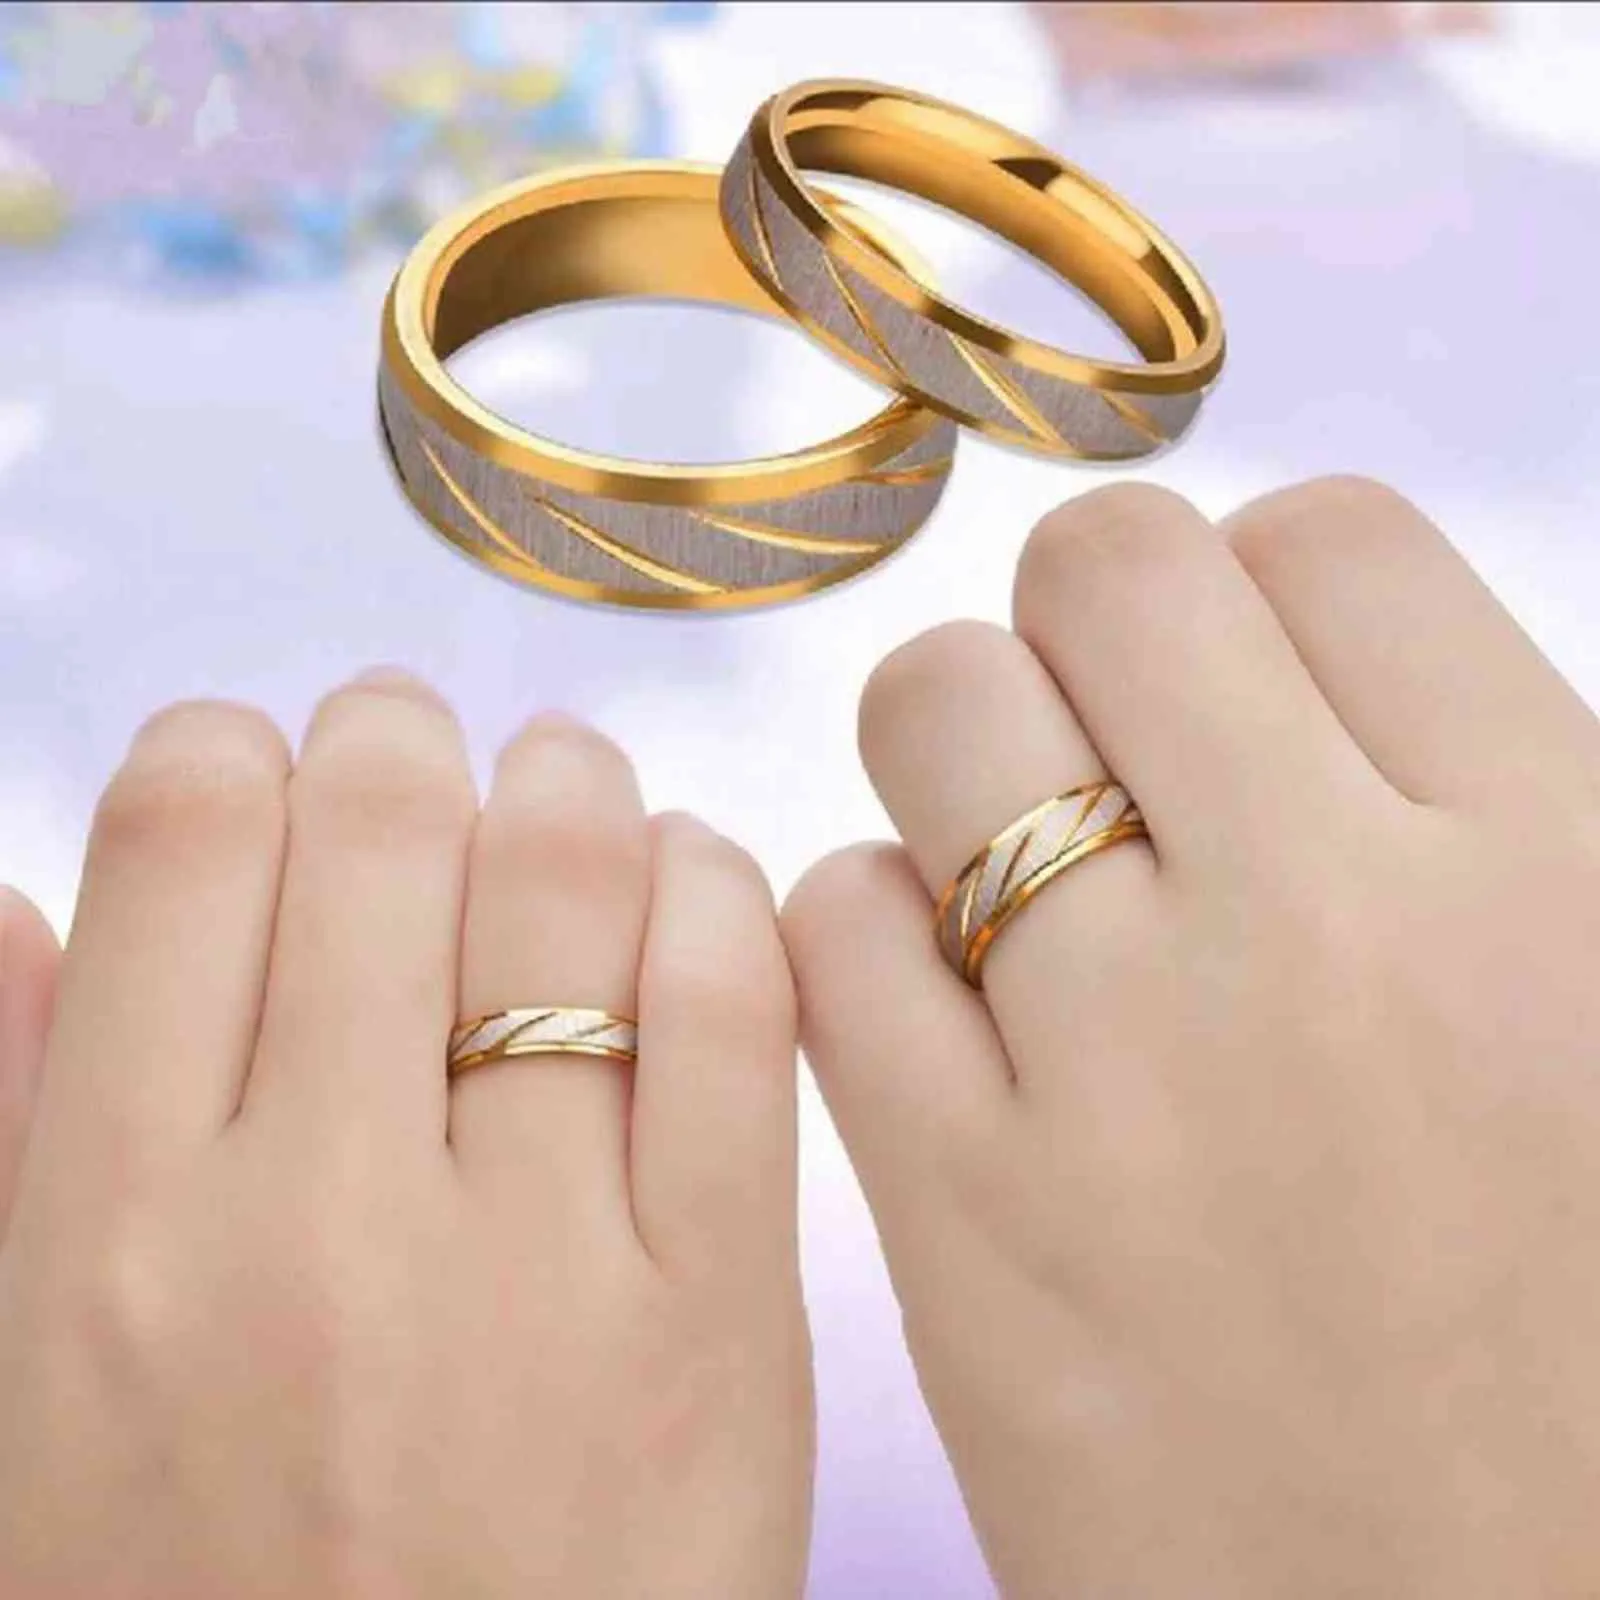 3d Render Of Gold Wedding Bands Symbolizing Unity Background, Couple Ring, Wedding  Ring, Gold Ring Background Image And Wallpaper for Free Download